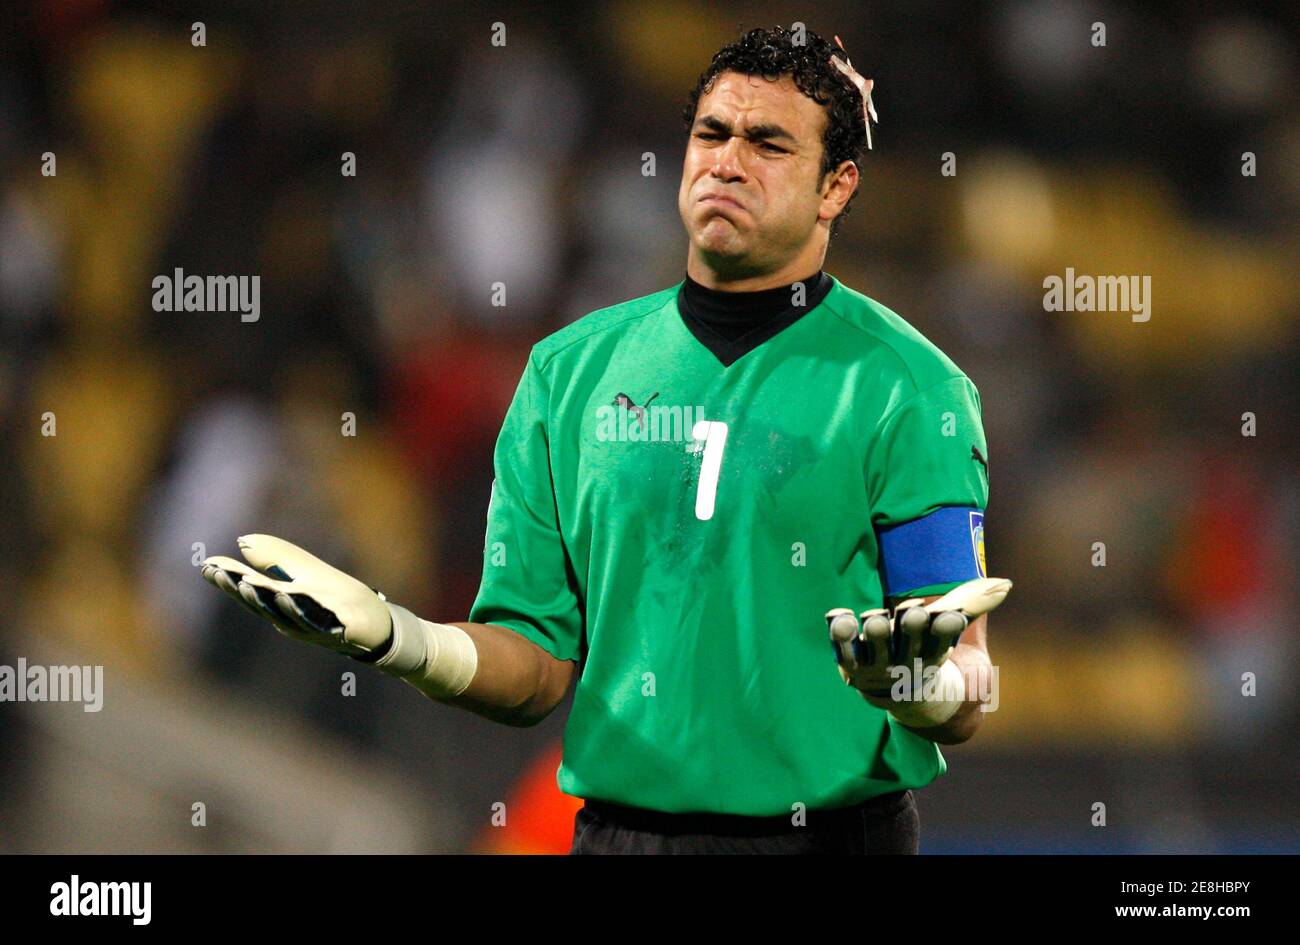 Egypt's goalkeeper Essam Al Hadari  reacts during their Confederations Cup soccer match against the U.S. at The Royal Bafokeng Sports Palace in Rustenburg June 21, 2009.       REUTERS/Jerry Lampen (SOUTH AFRICA SPORT SOCCER) Stock Photo